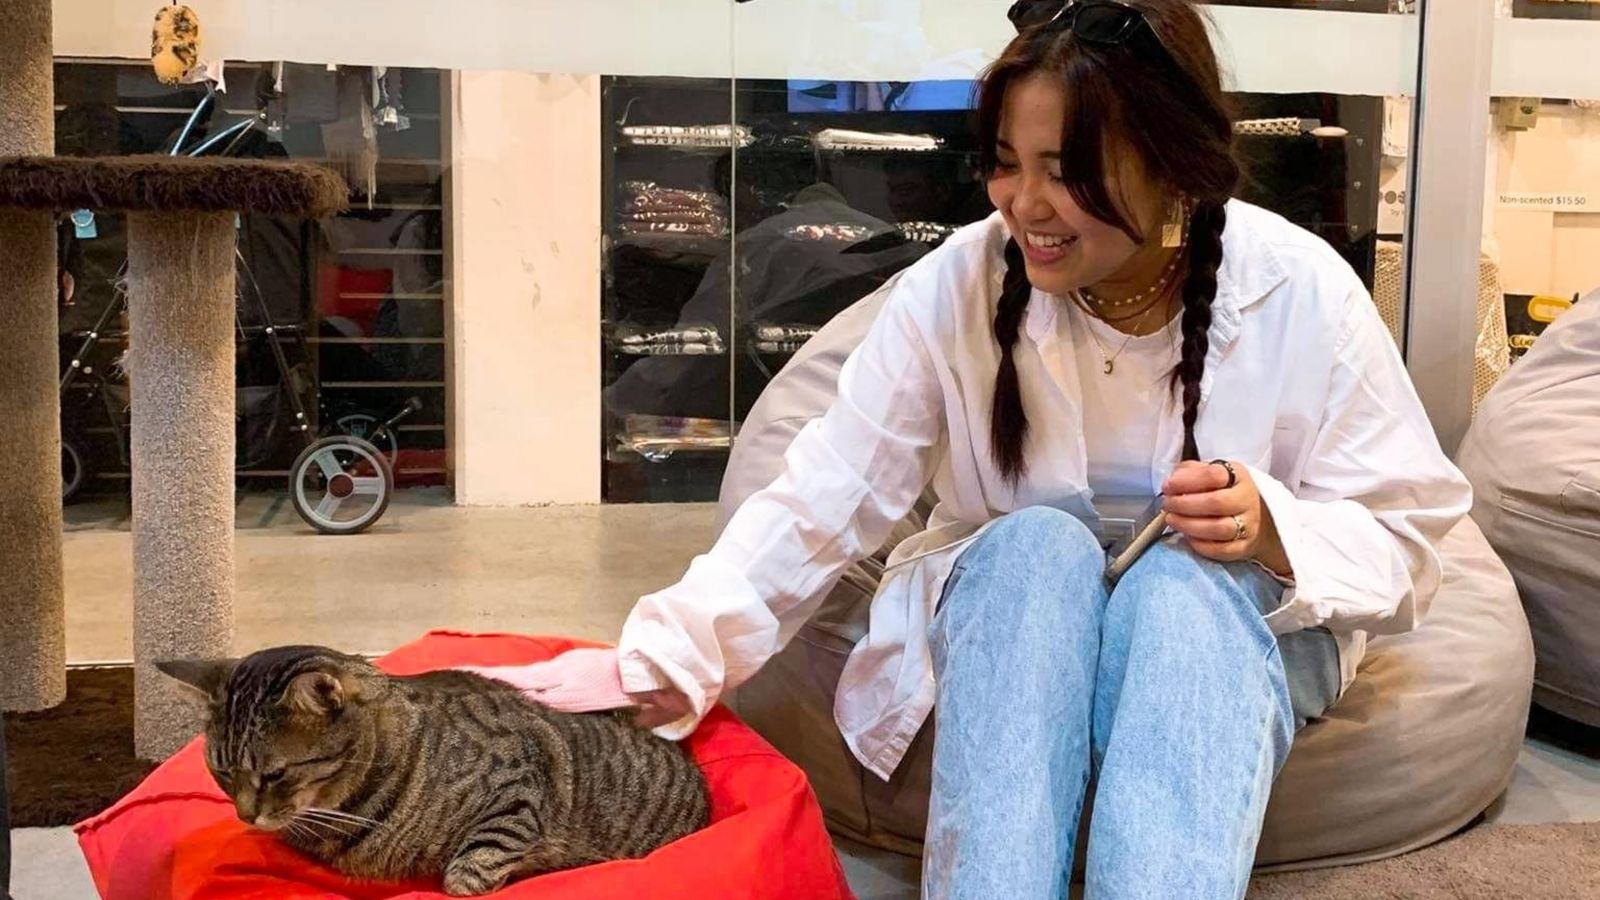 Student sitting on bean bag, petting cat at cat cafe.